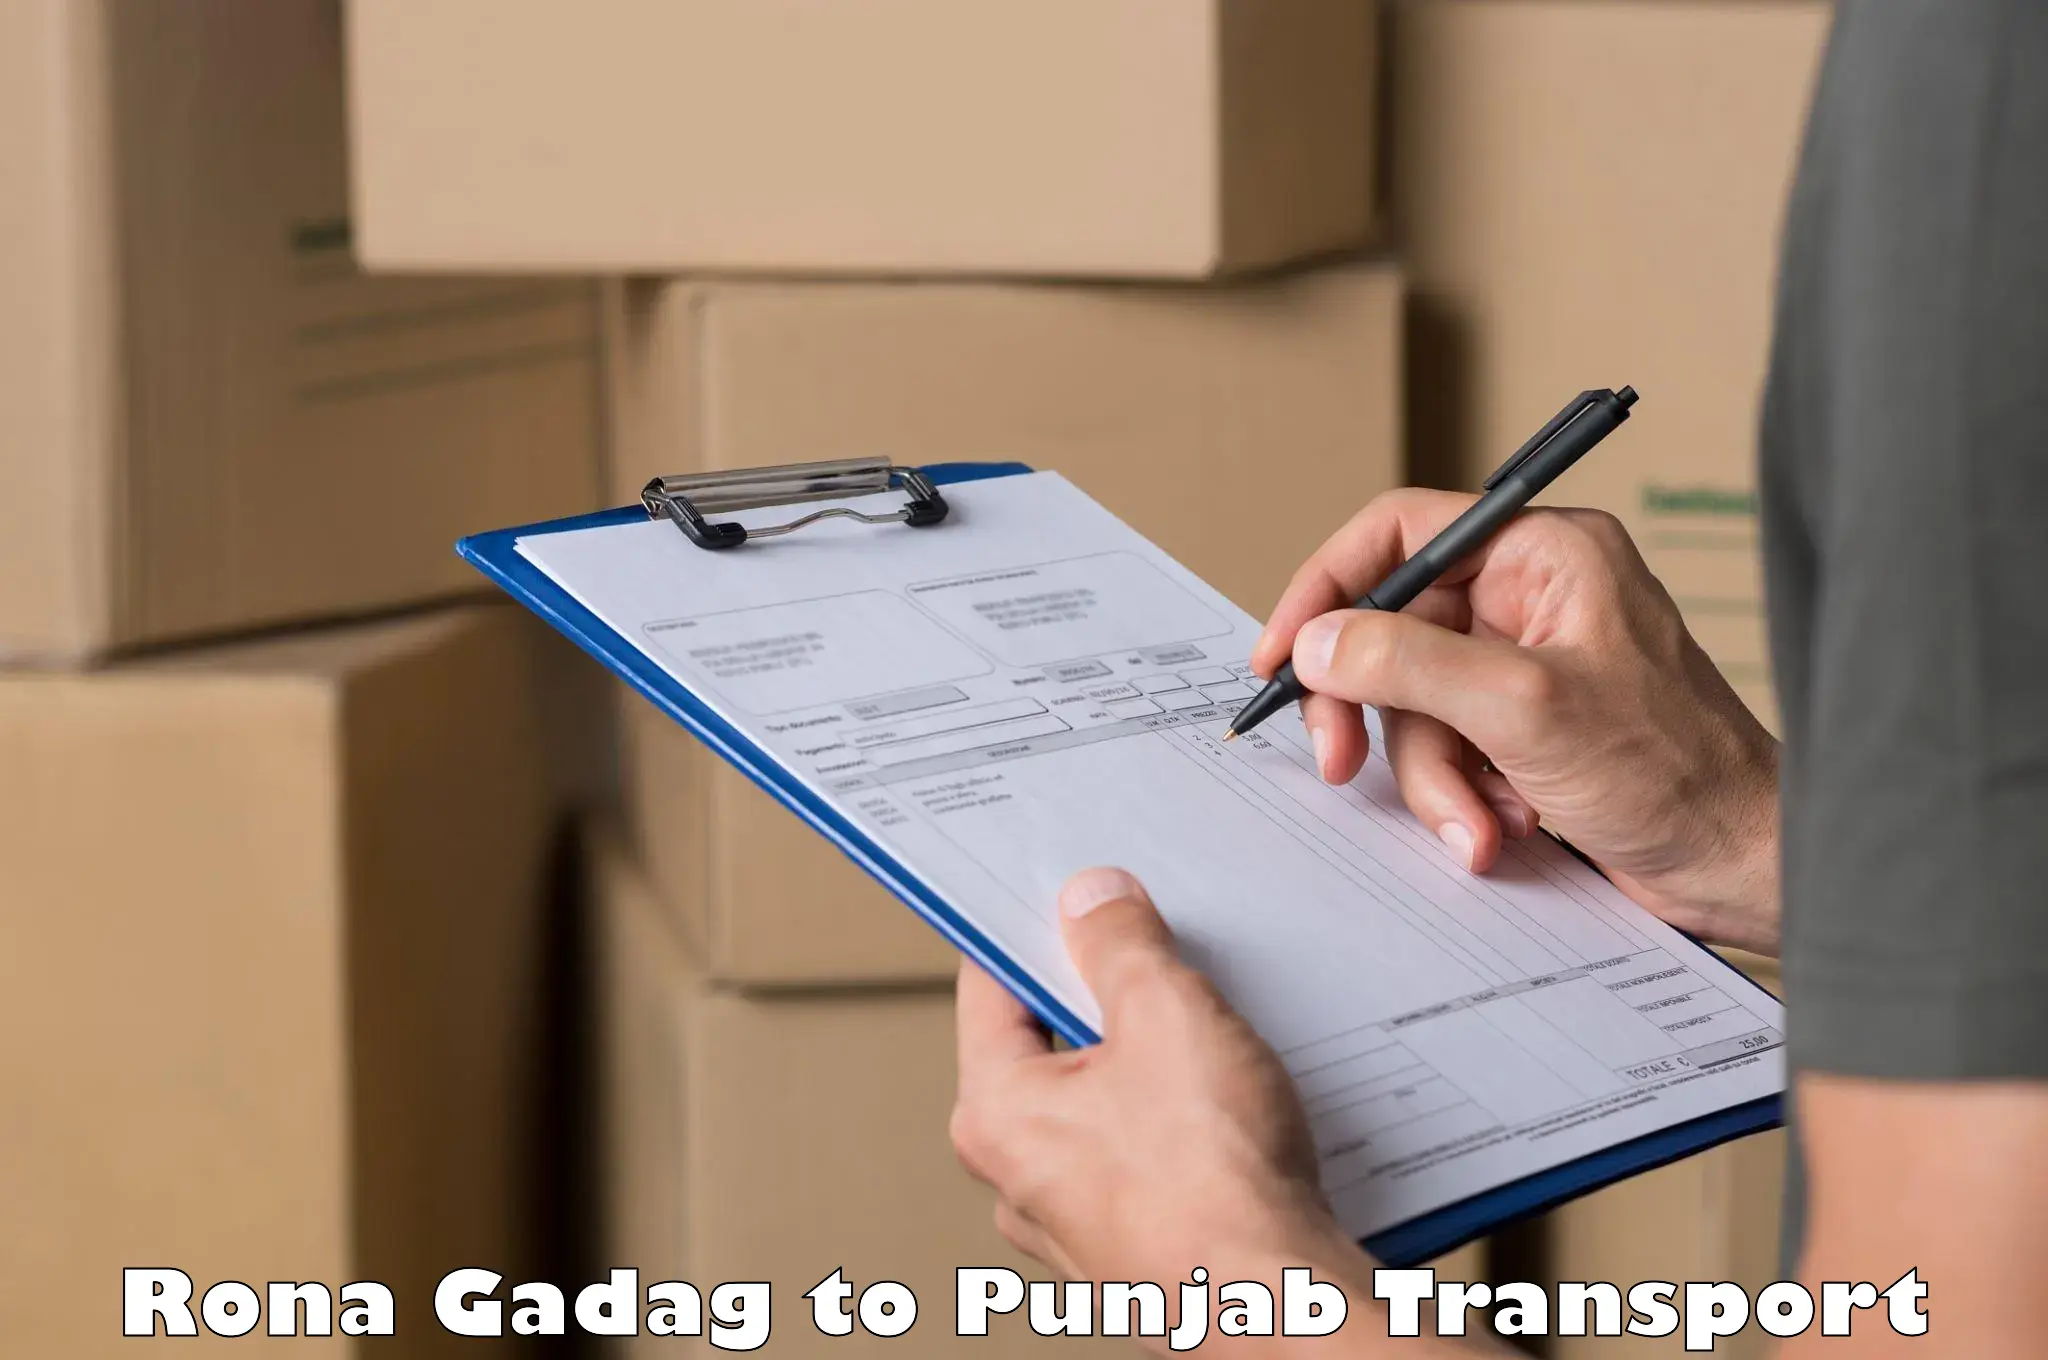 Nearby transport service Rona Gadag to Pathankot